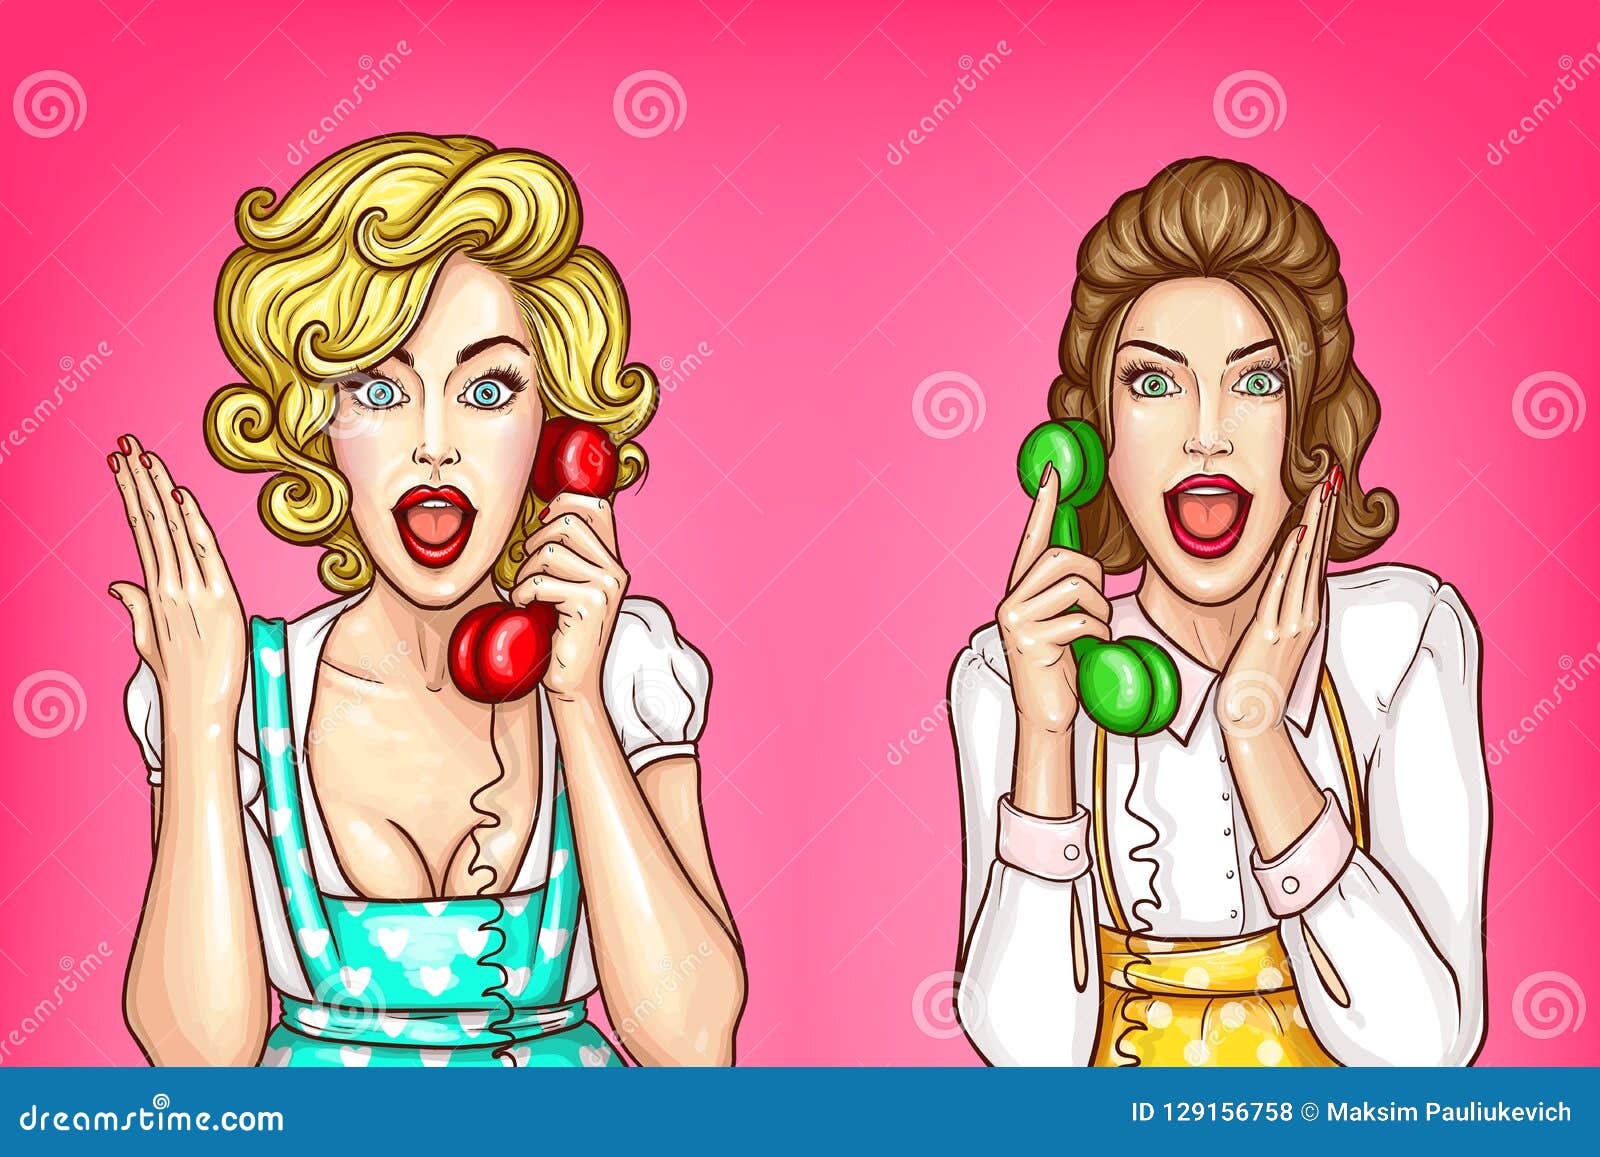  women talk on the phone, excited housewives